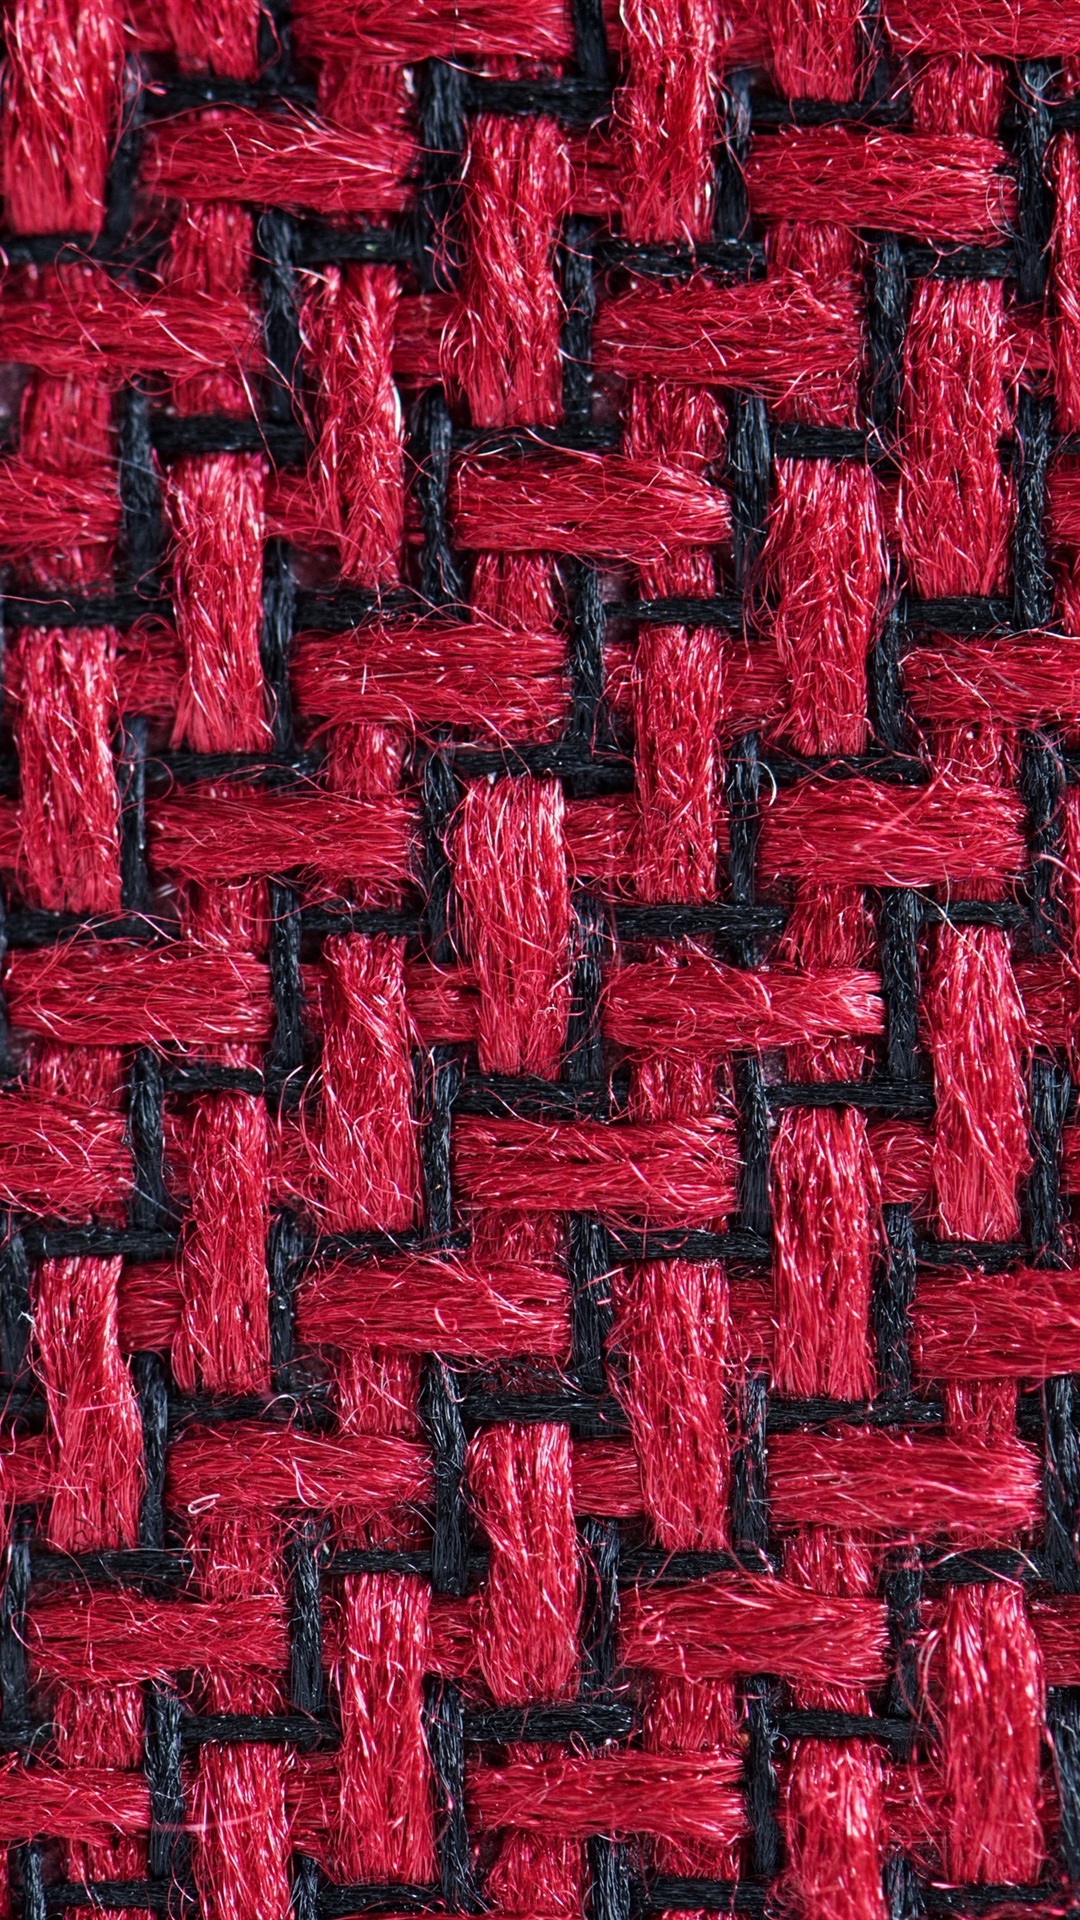 Iphone Wallpaper Fabric Fibers Surface, Red And Black - HD Wallpaper 